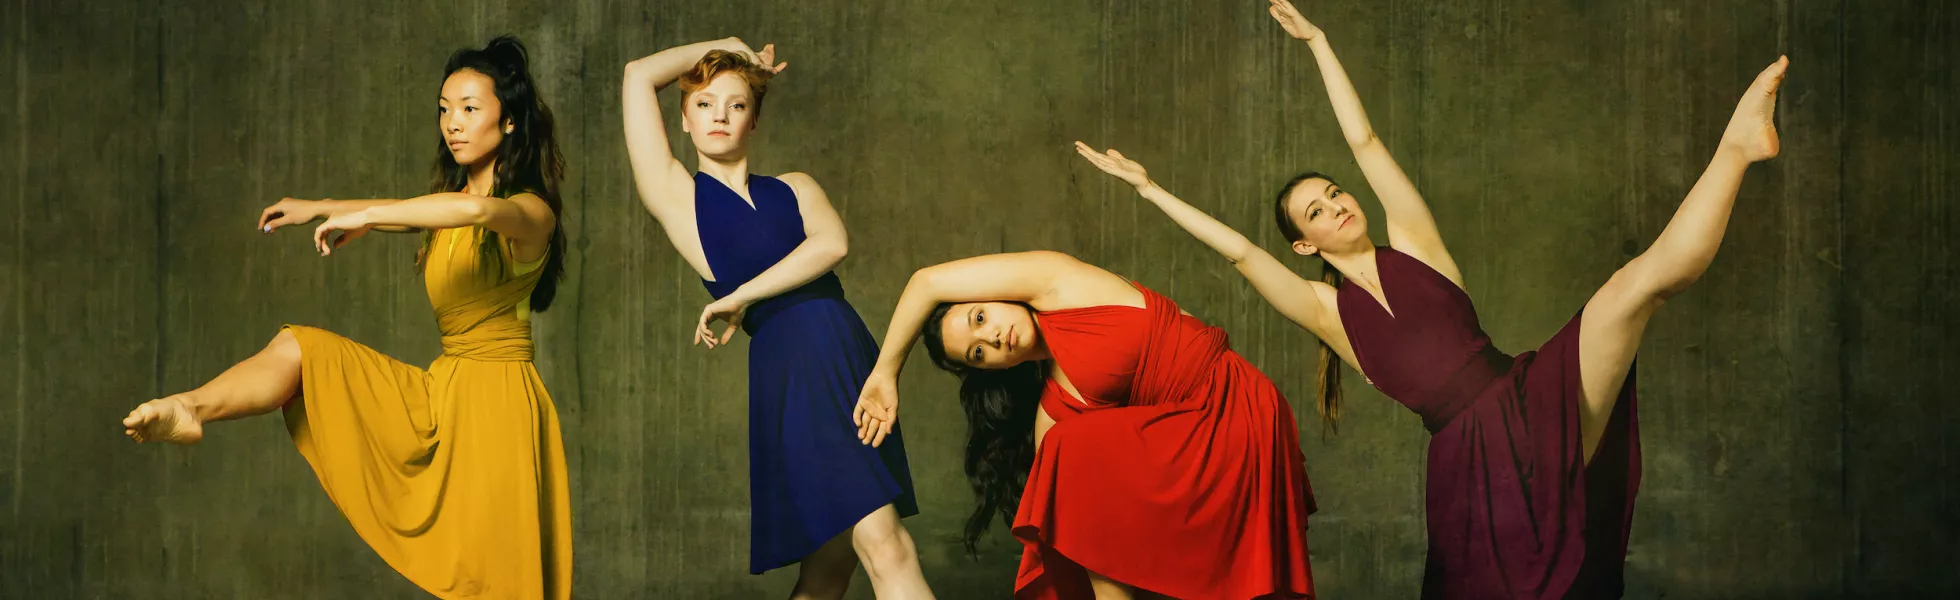 4 dancers in various poses wearing yellow, navy, red, and plum dresses.